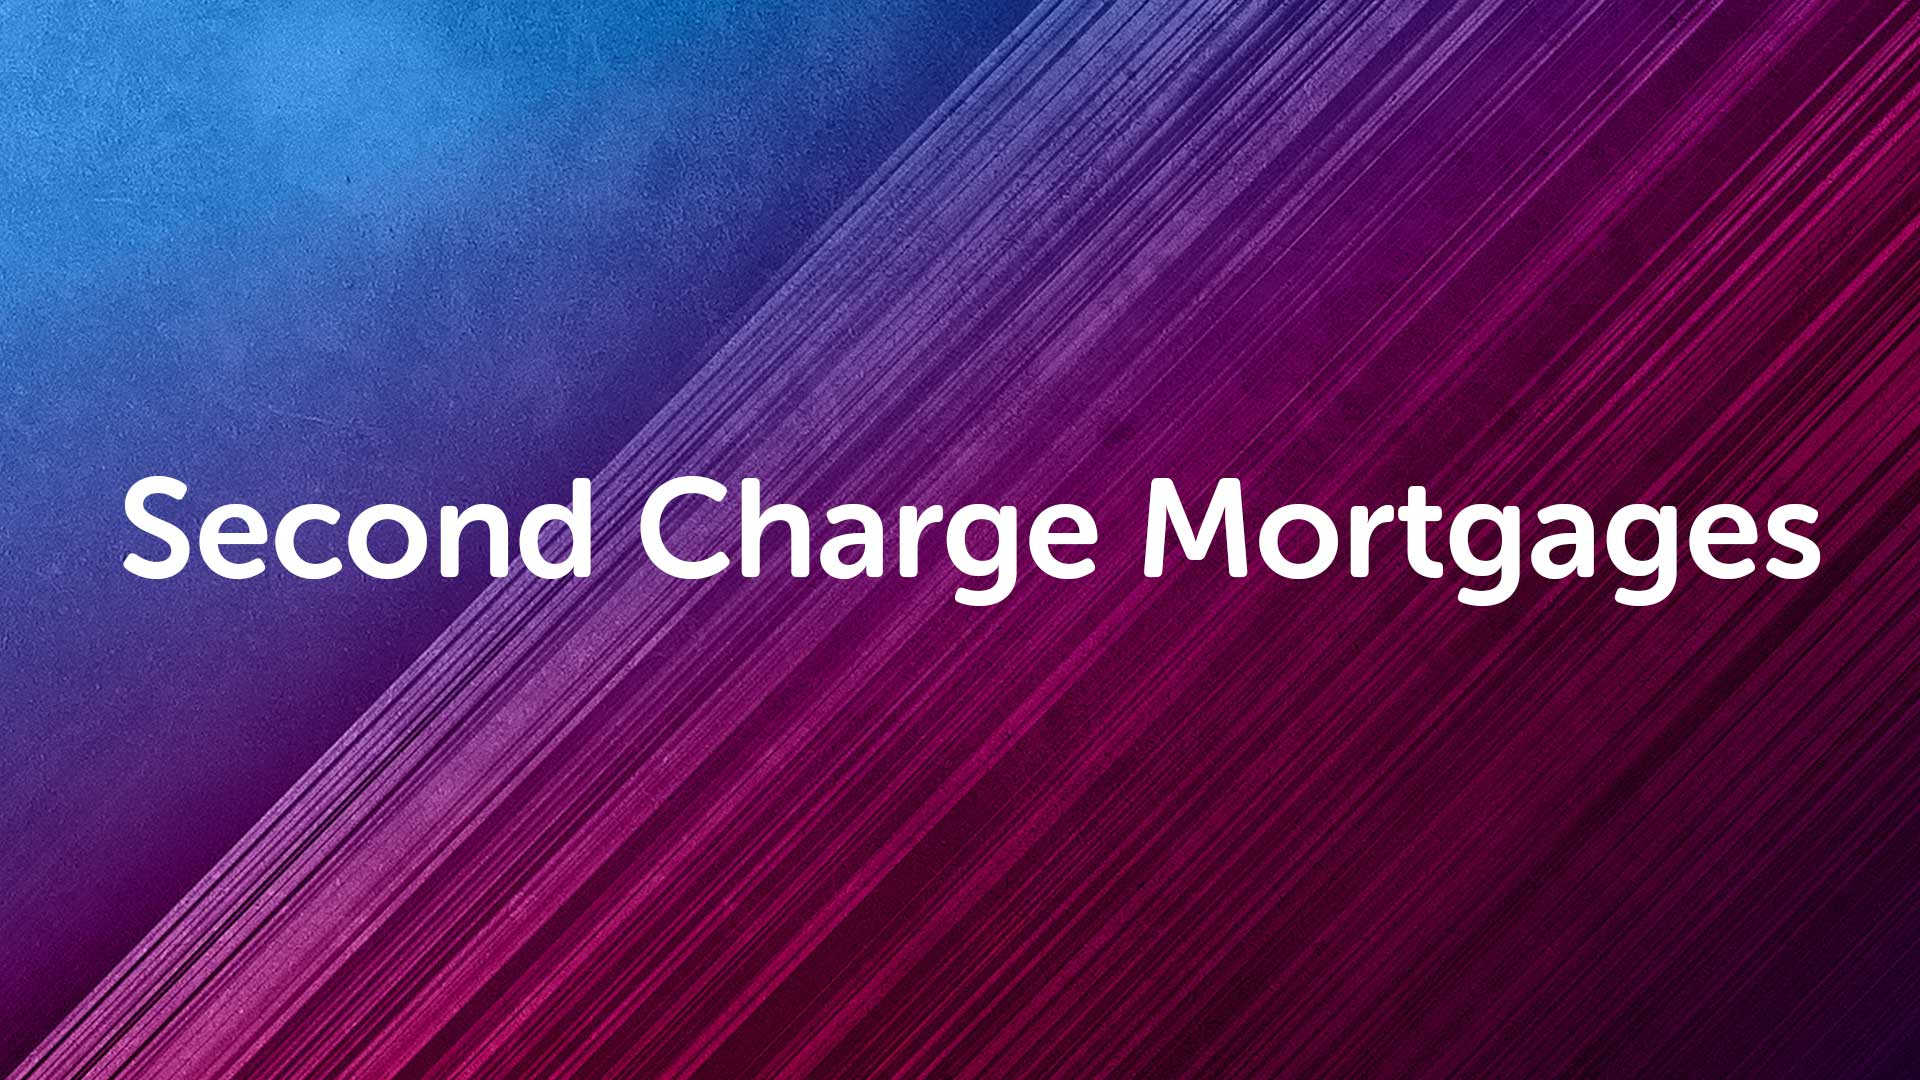 Second Charge Mortgage in Liverpool | Liverpoolmoneyman